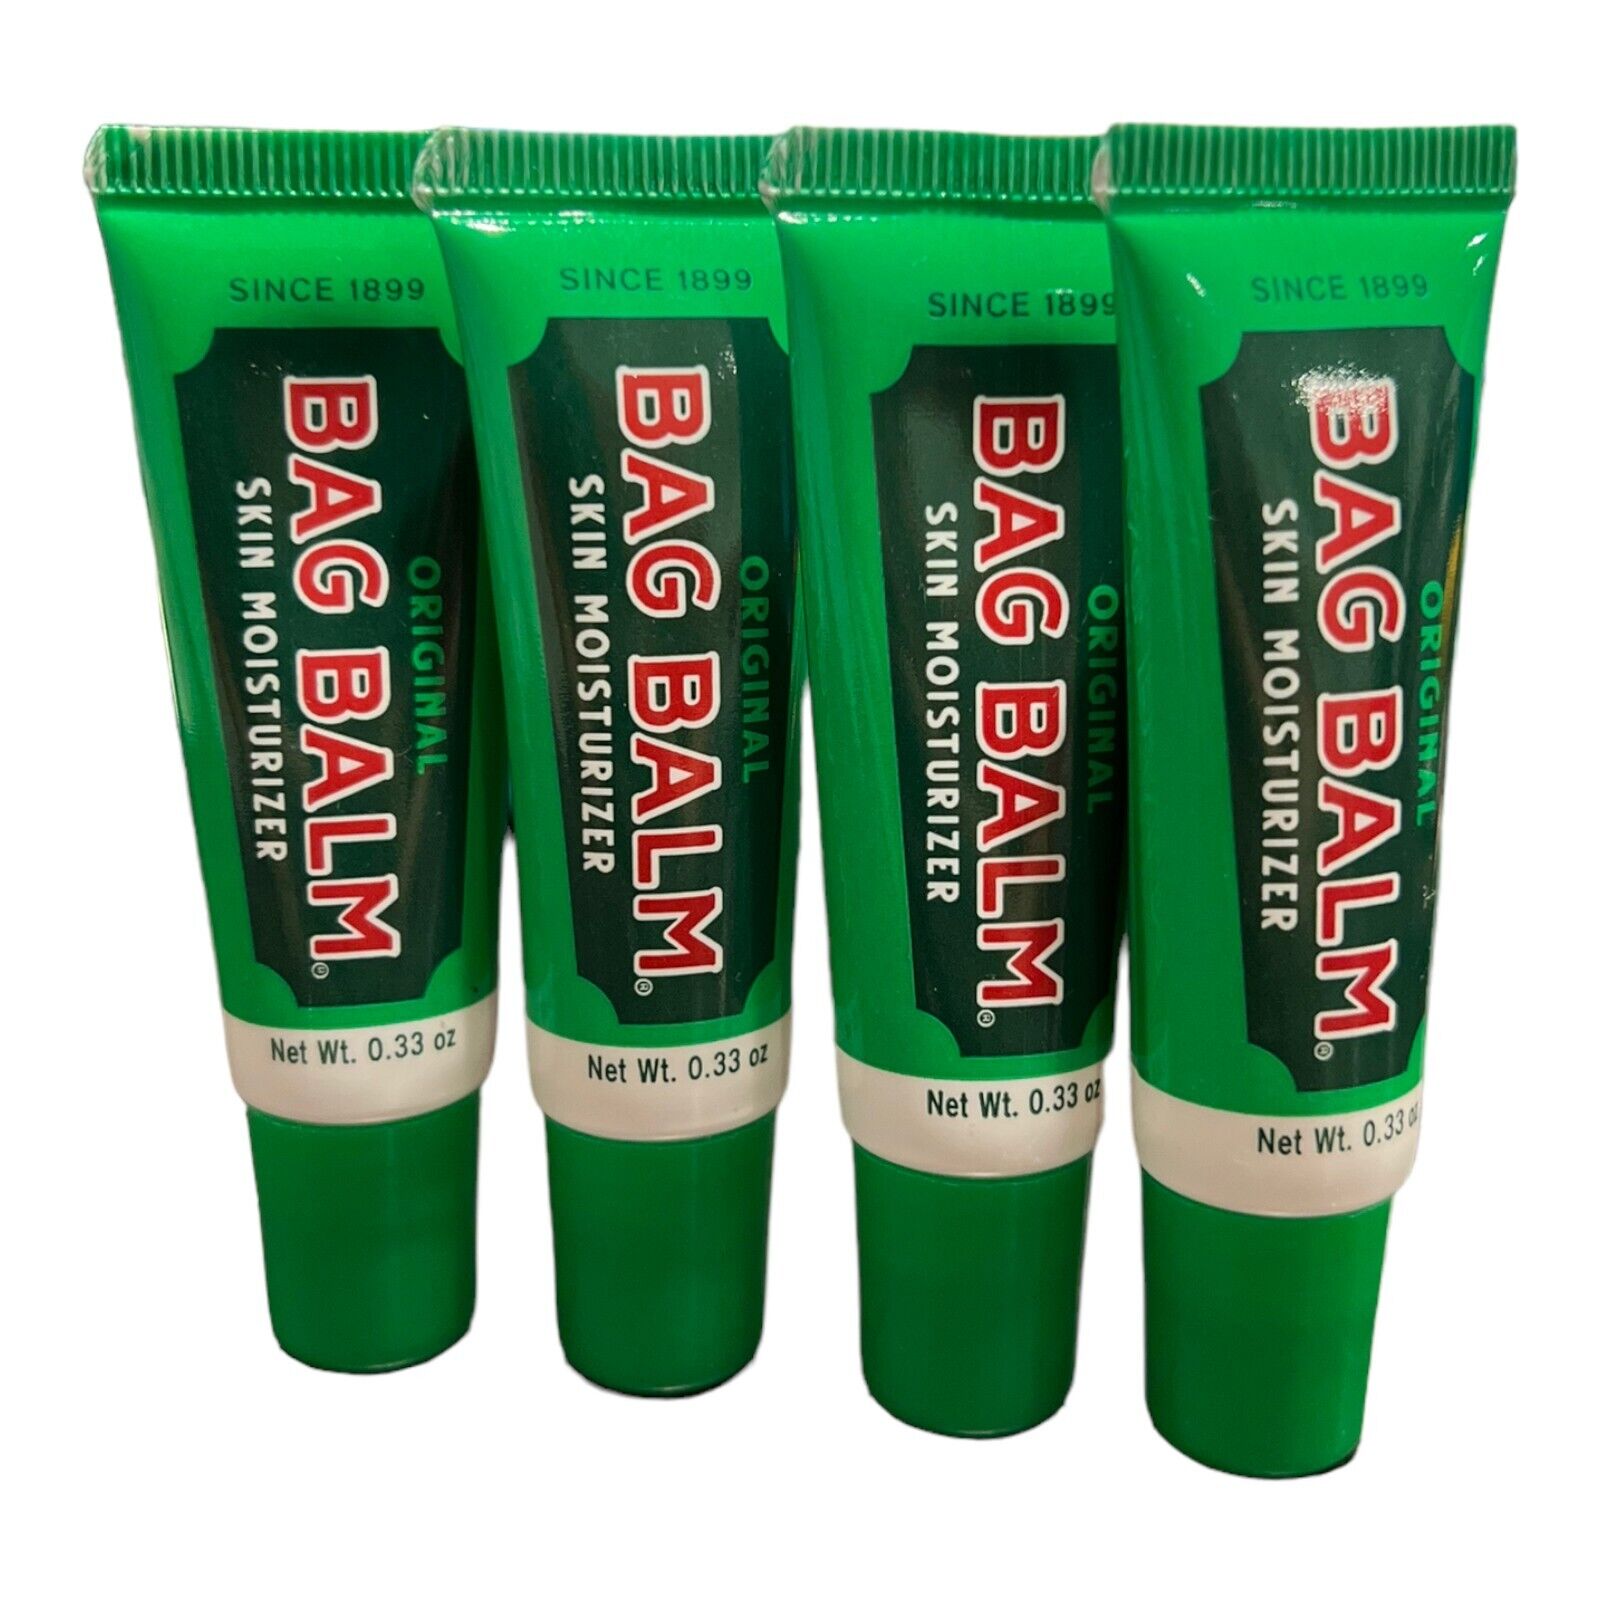 Vermonts Original Bag Balm- on the Go! Skin Moisturizer for Dry Skin That Can Crack Split or Chafe- 4 Pack